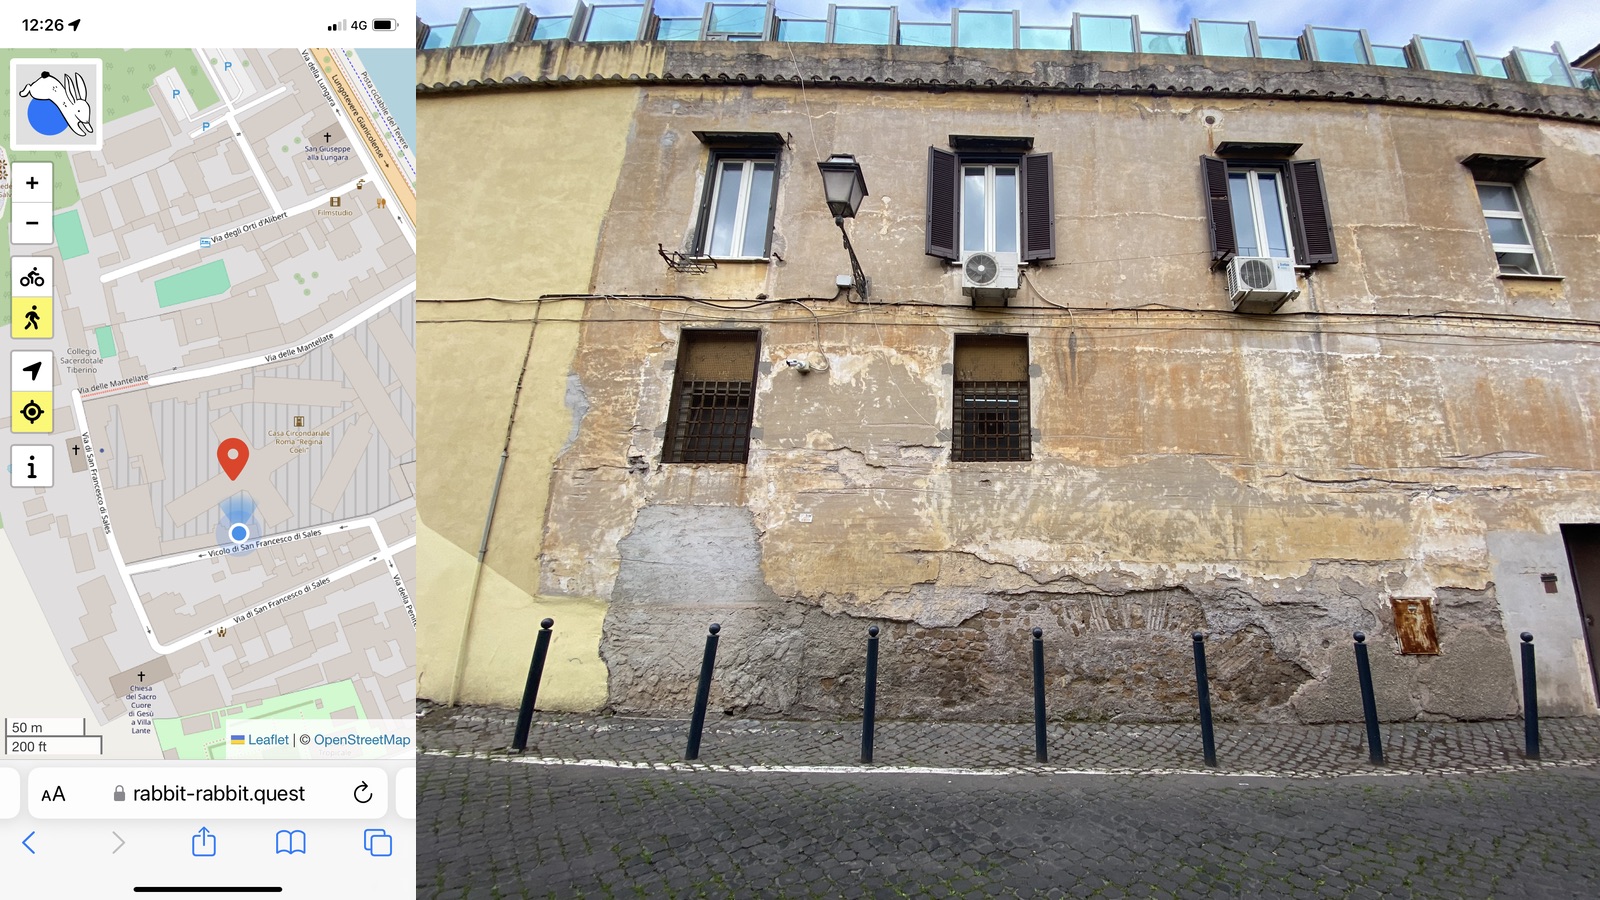 Composite image with my location on the left and on the right, the quest: a wide-andle photo of a wall missing most of its stucco at the bottom, revelaing ancient brickwork and two courses of windows, the lower ones barred, the uppwer ones with shutters. Above, a fence of glass panels.